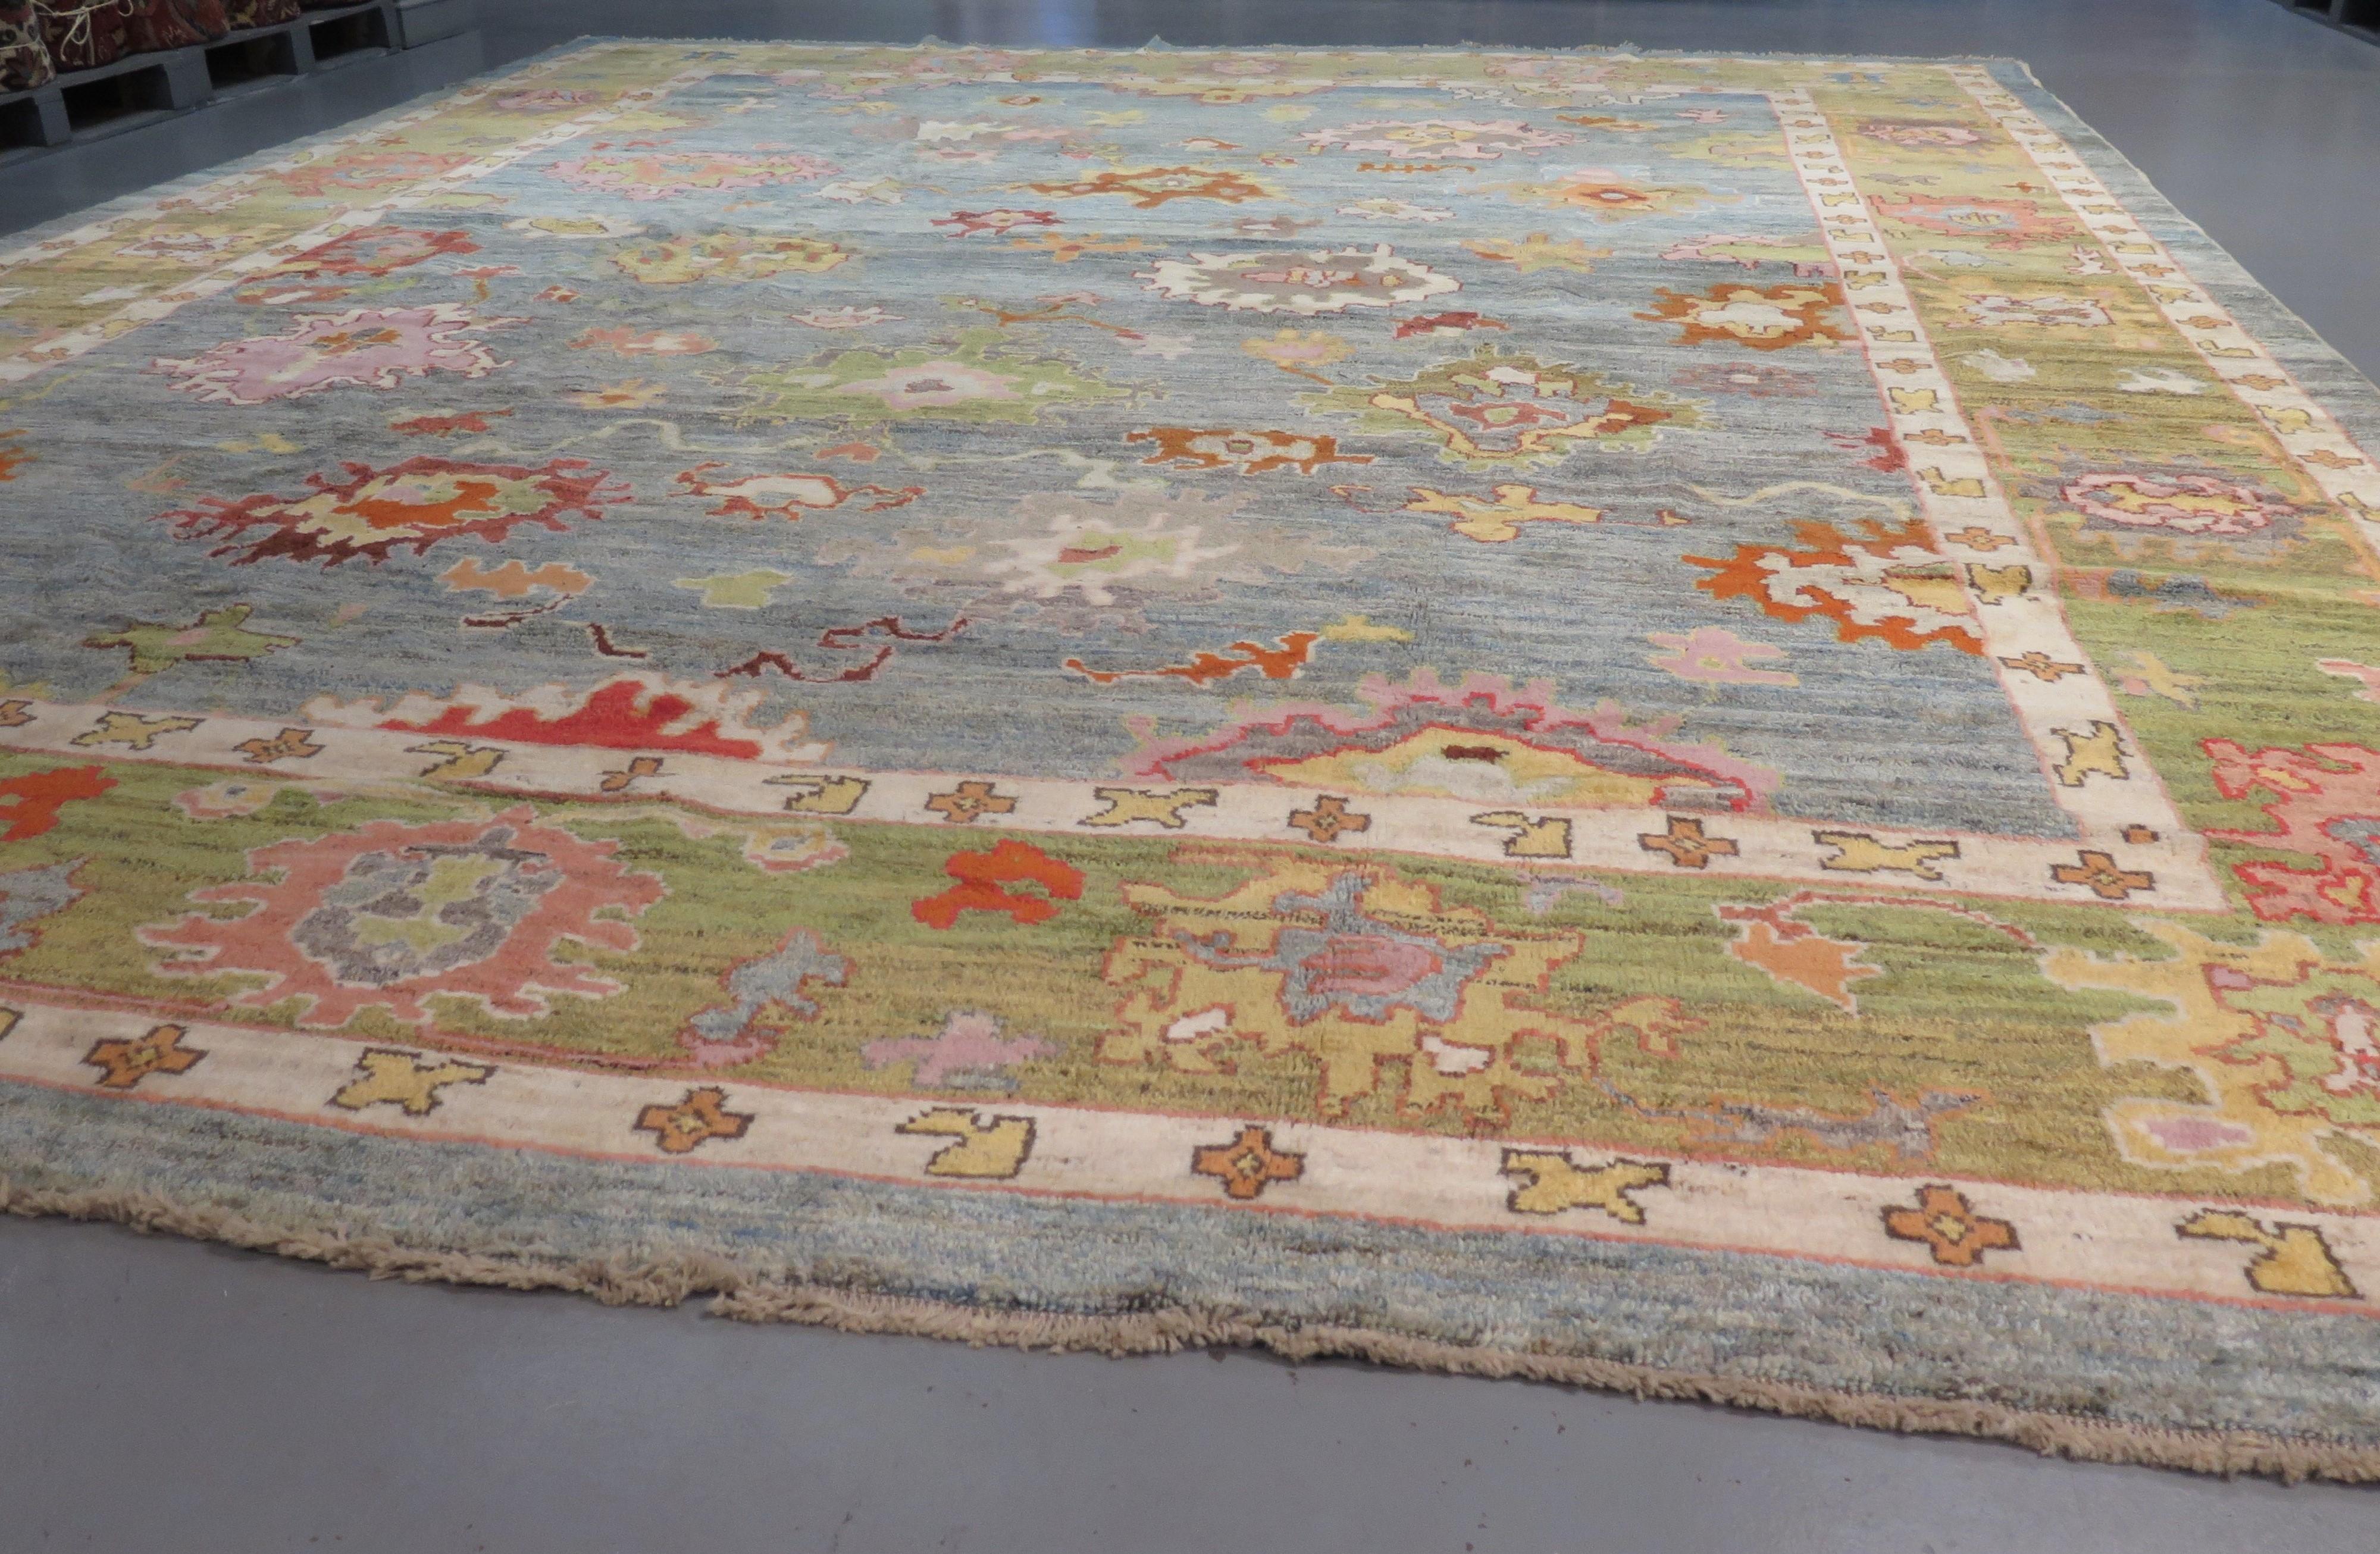 Beautiful Oushak carpet, hand woven in Turkey with lustrous wool and vegetable-dyed colours. A modern interpretation of 19th century Oushak carpets with a large scale drawing and a harmonious variety of fresh colours.

Antique Oushak carpets of